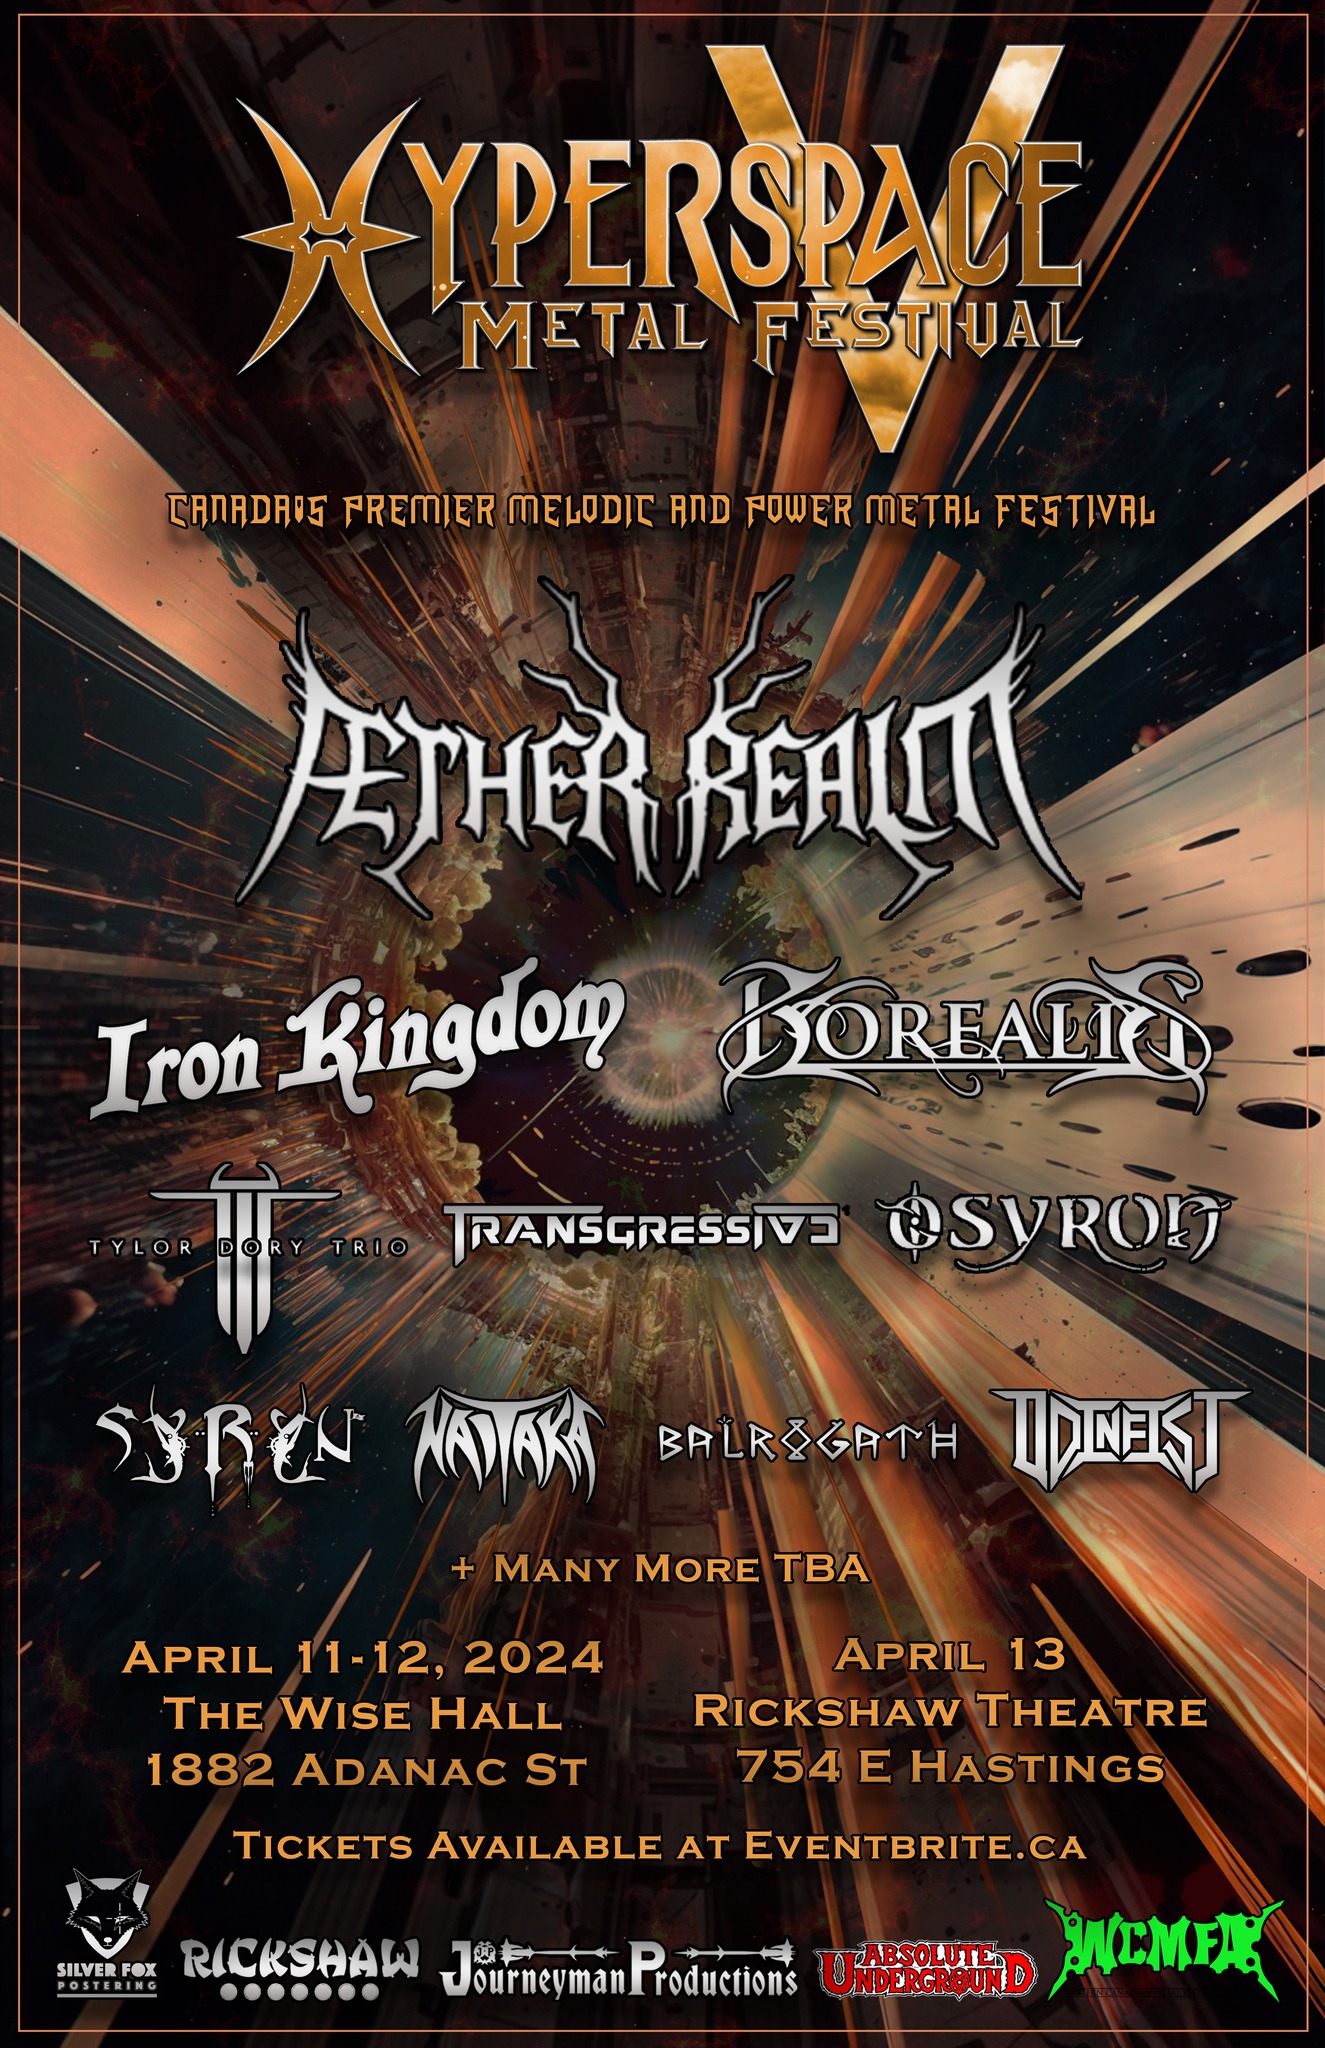 AETHER REALM, IRON KINGDOM, BOREALIS, And More Confirmed For Vancouver